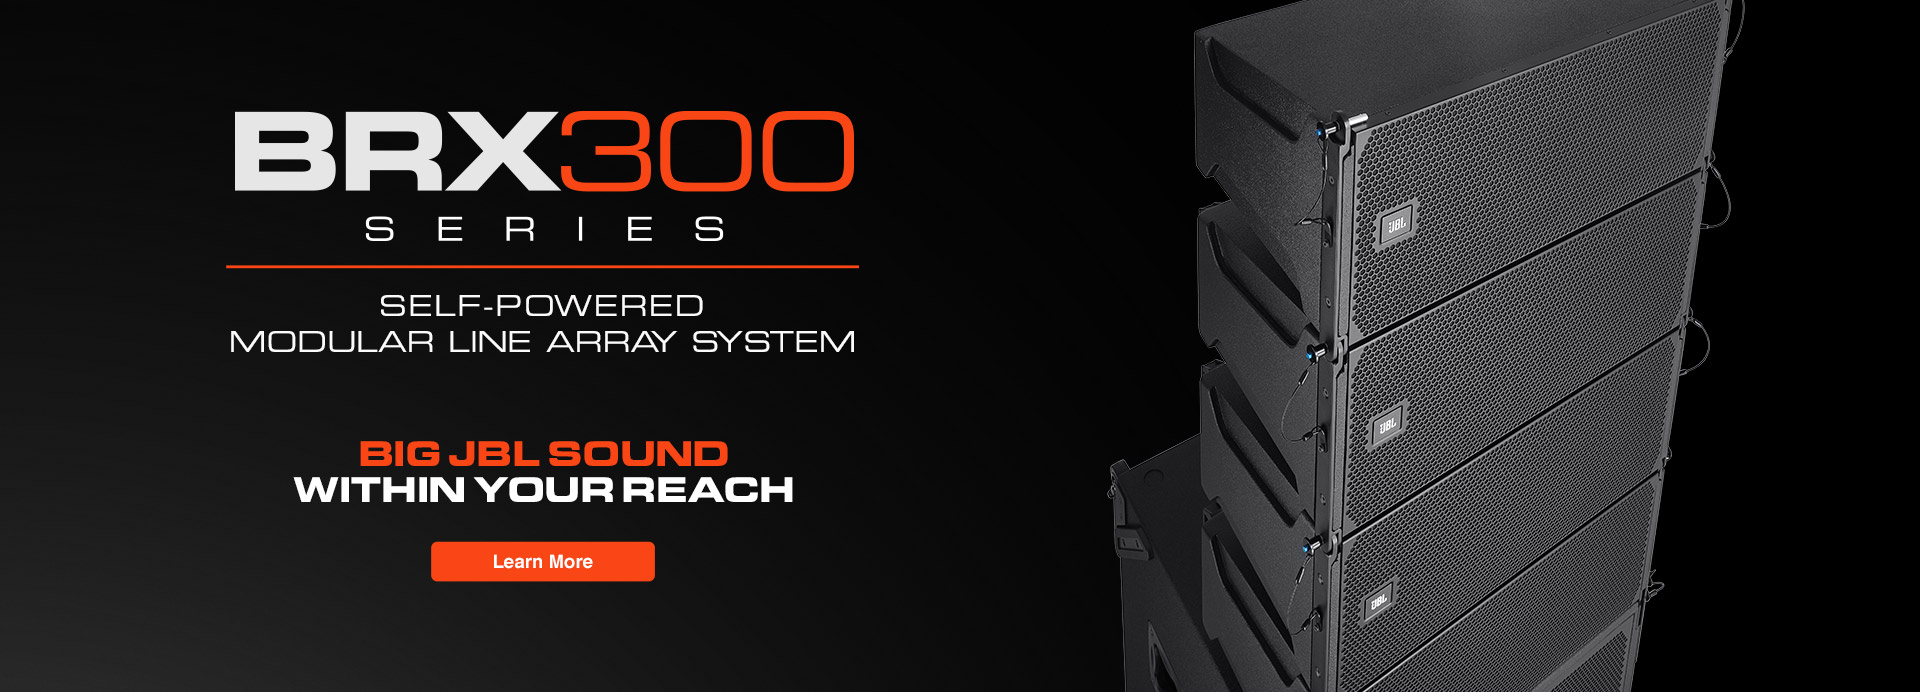 BRX300 Series Launch